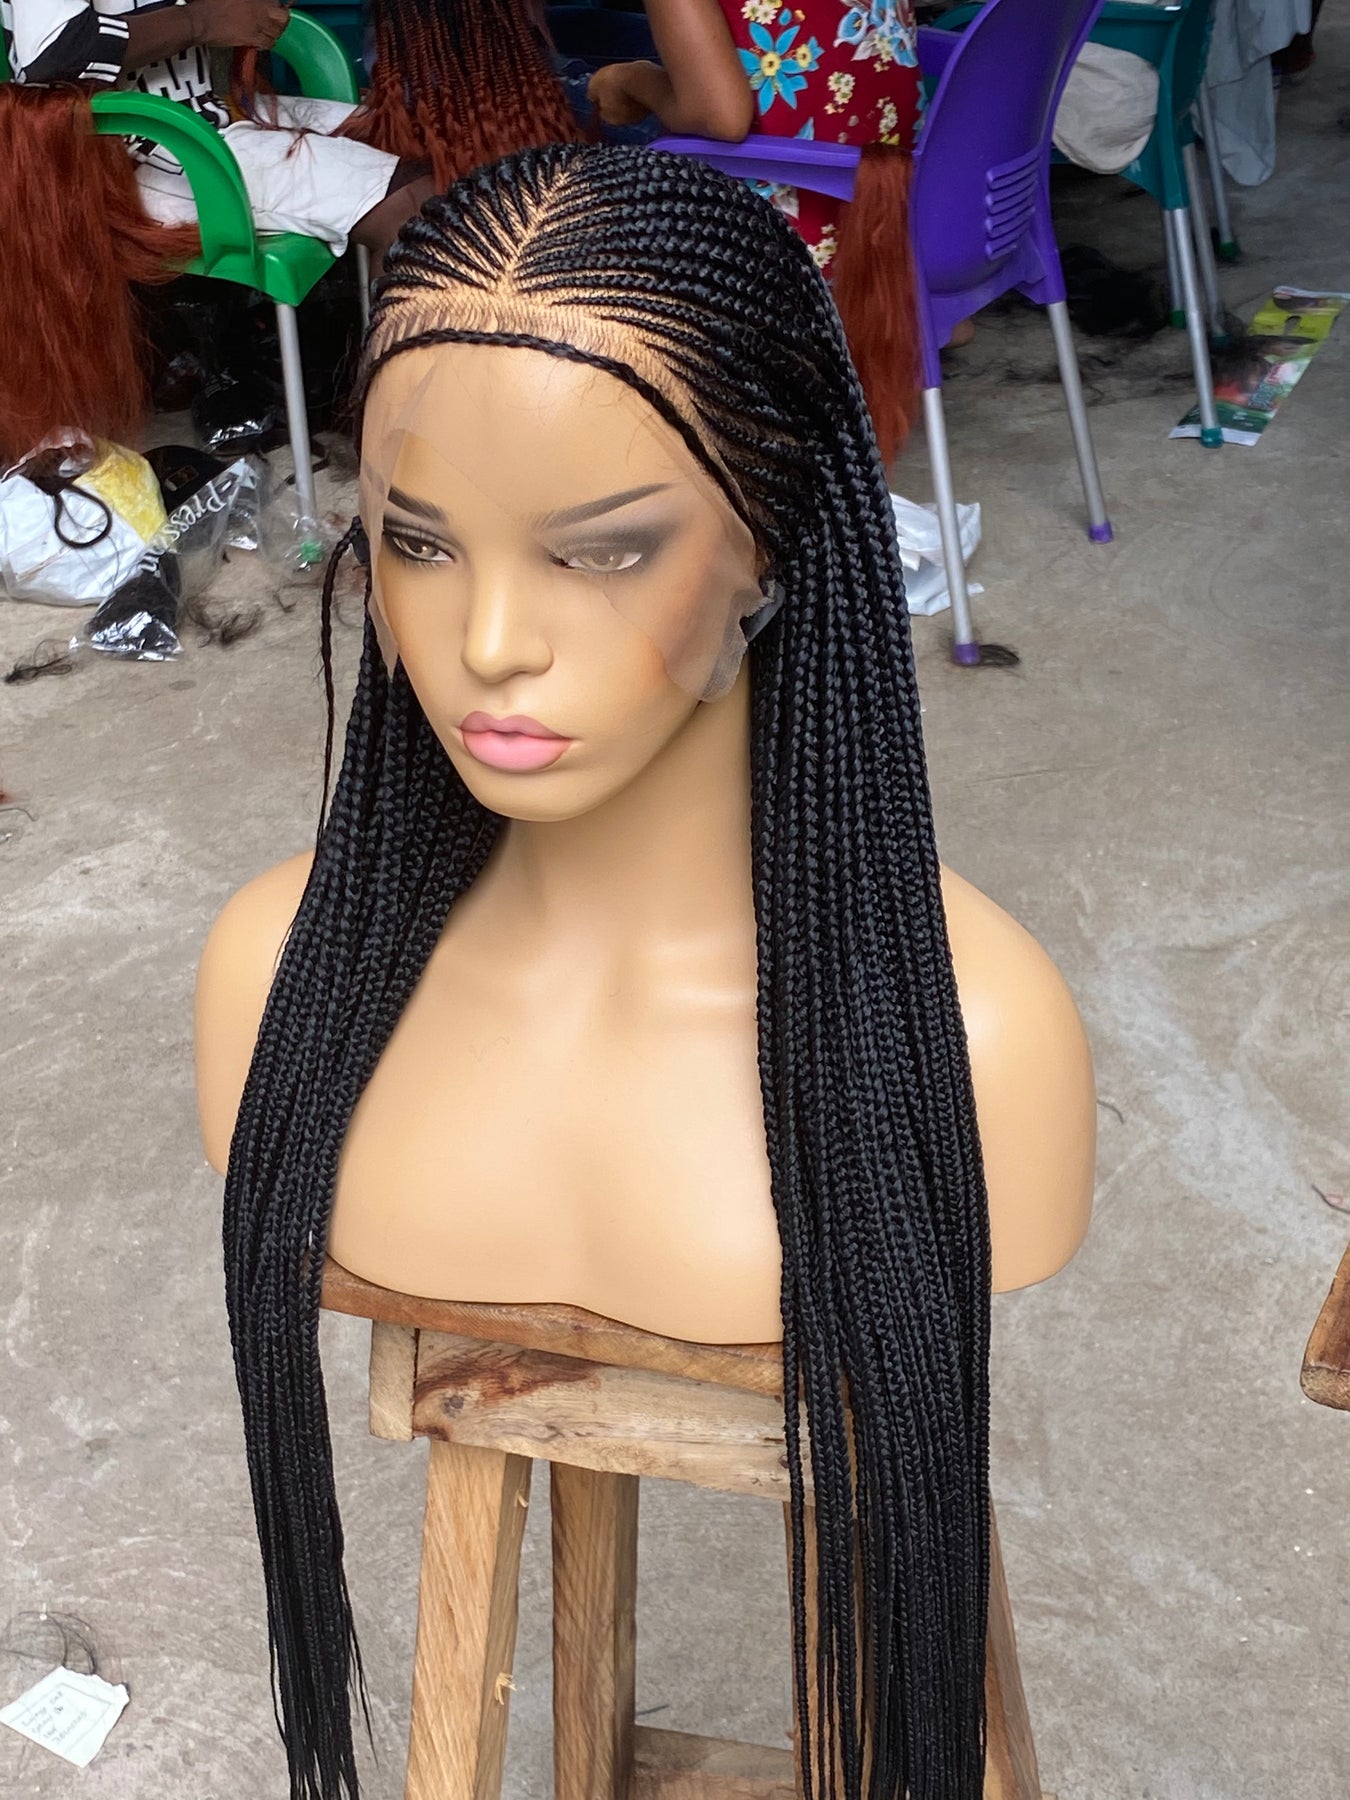 Type Of Lace Wigs - Poshglad Braided Wigs